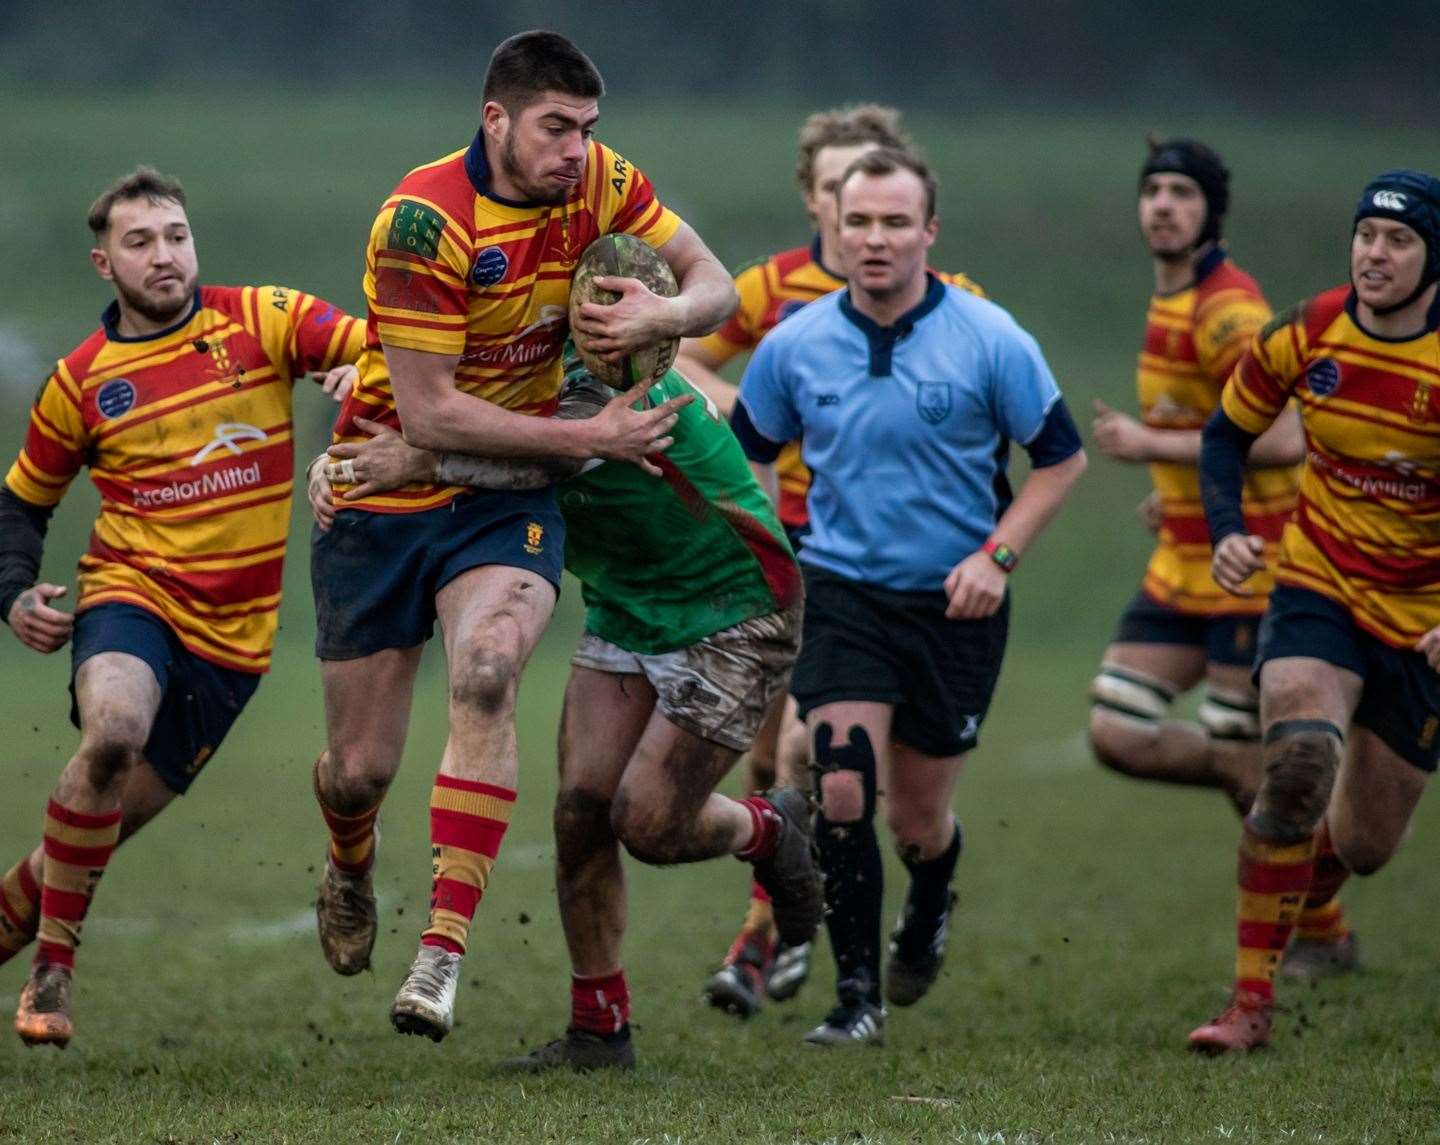 Max Bullock scored two tries against Battersea Ironsides. Picture: Jake Miles Sports Photography